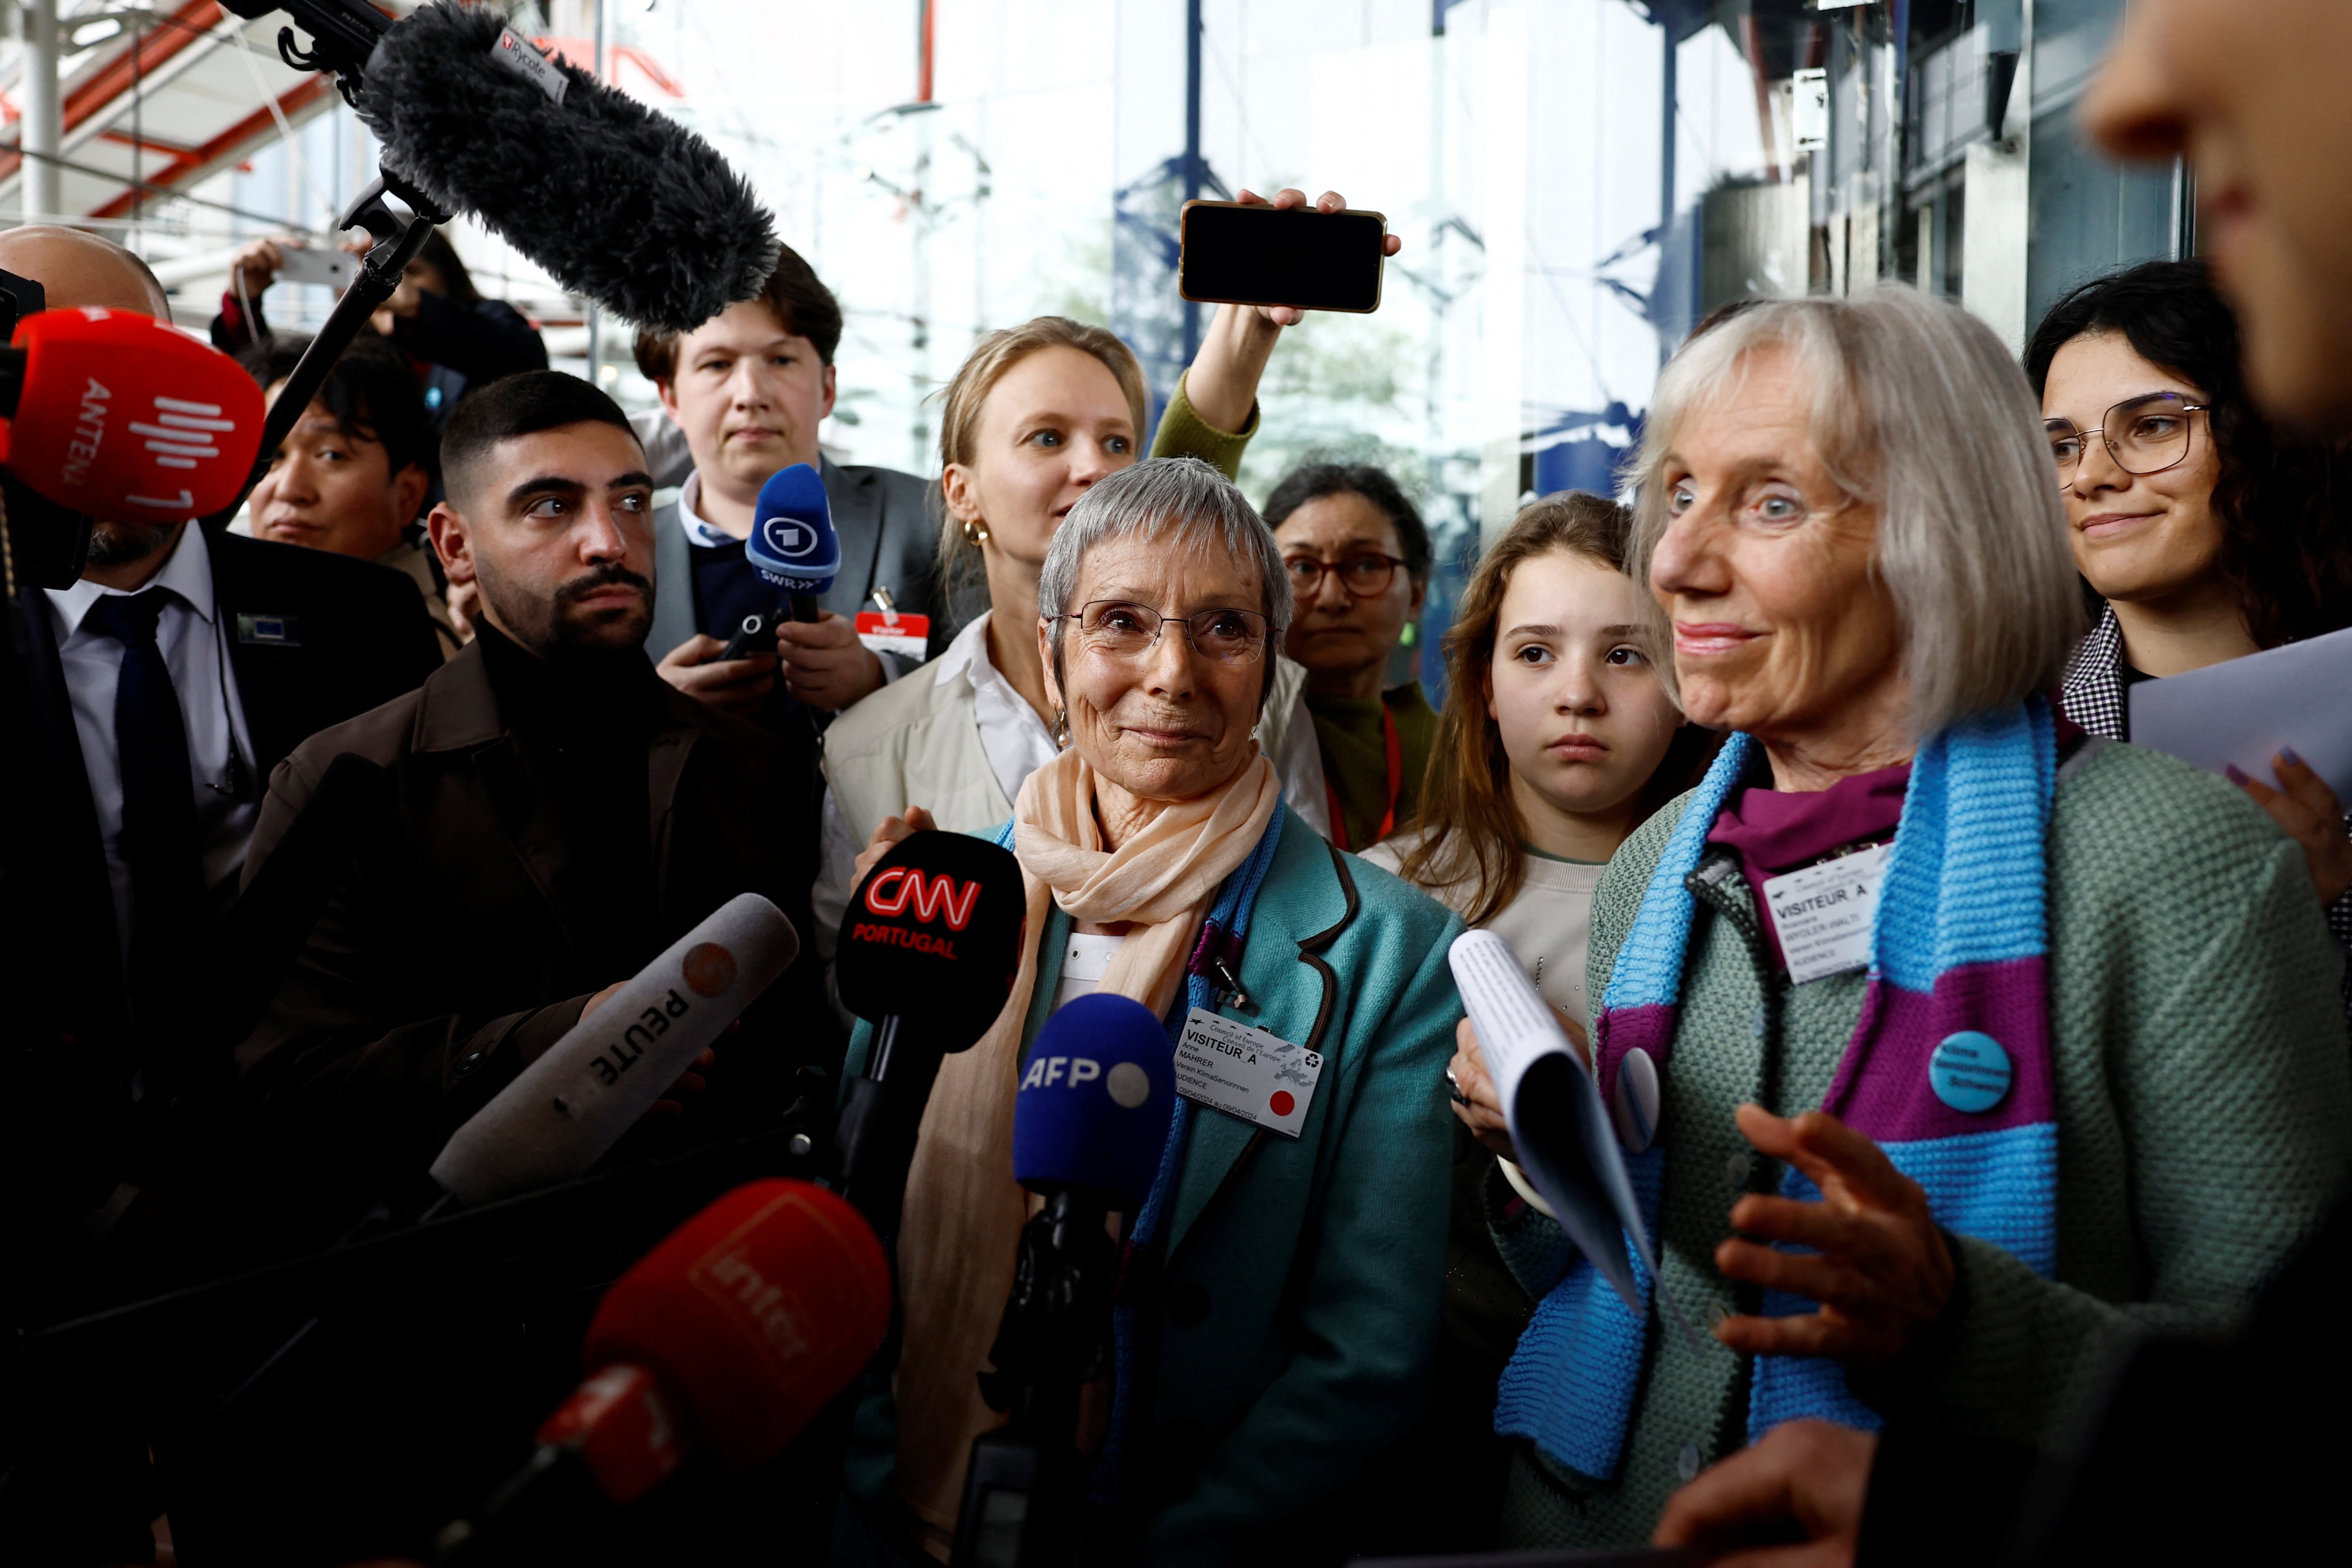 Anne Mahrer and Rosmarie Wyder-Walti, of the Senior Women for Climate Protection, talk to journalists after the court verdict on April 9. Photo: Reuters